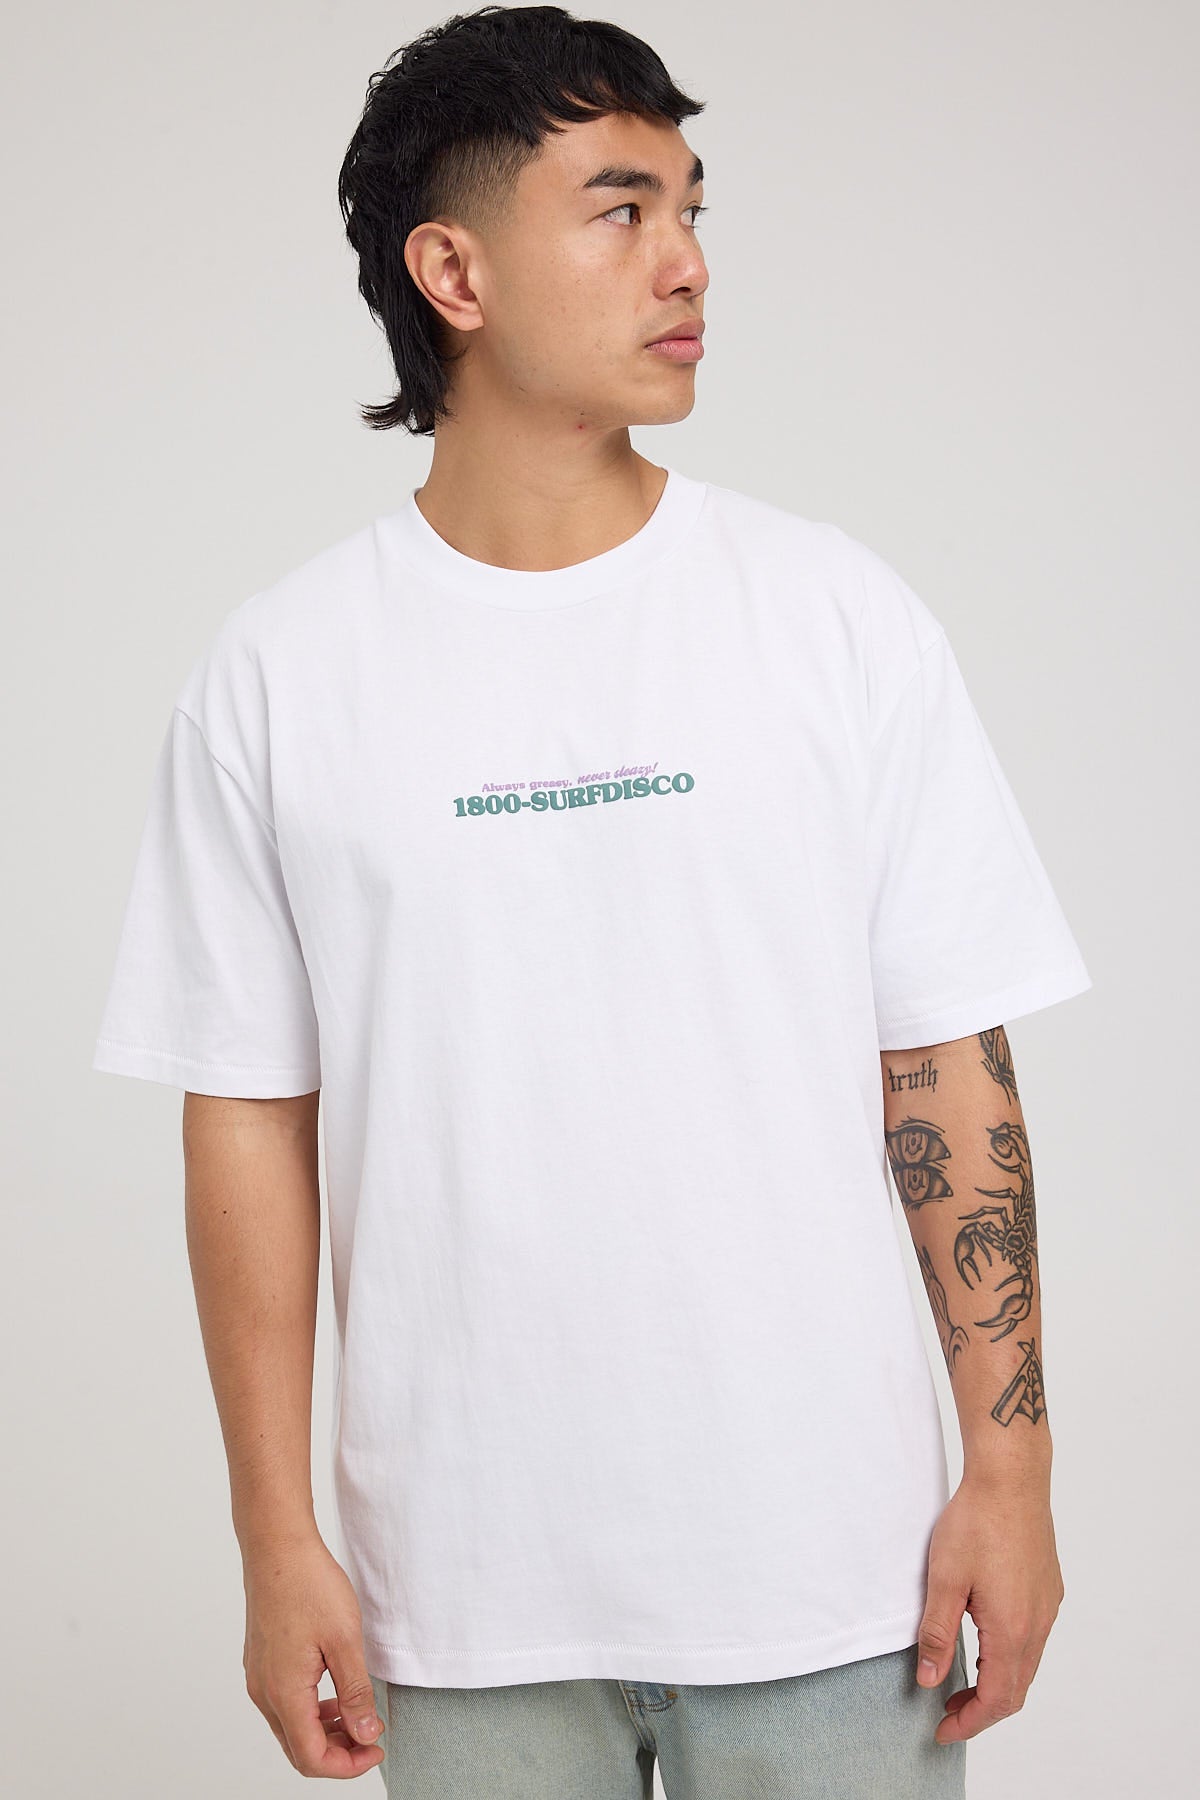 Barney Cools Pizza White Tee White